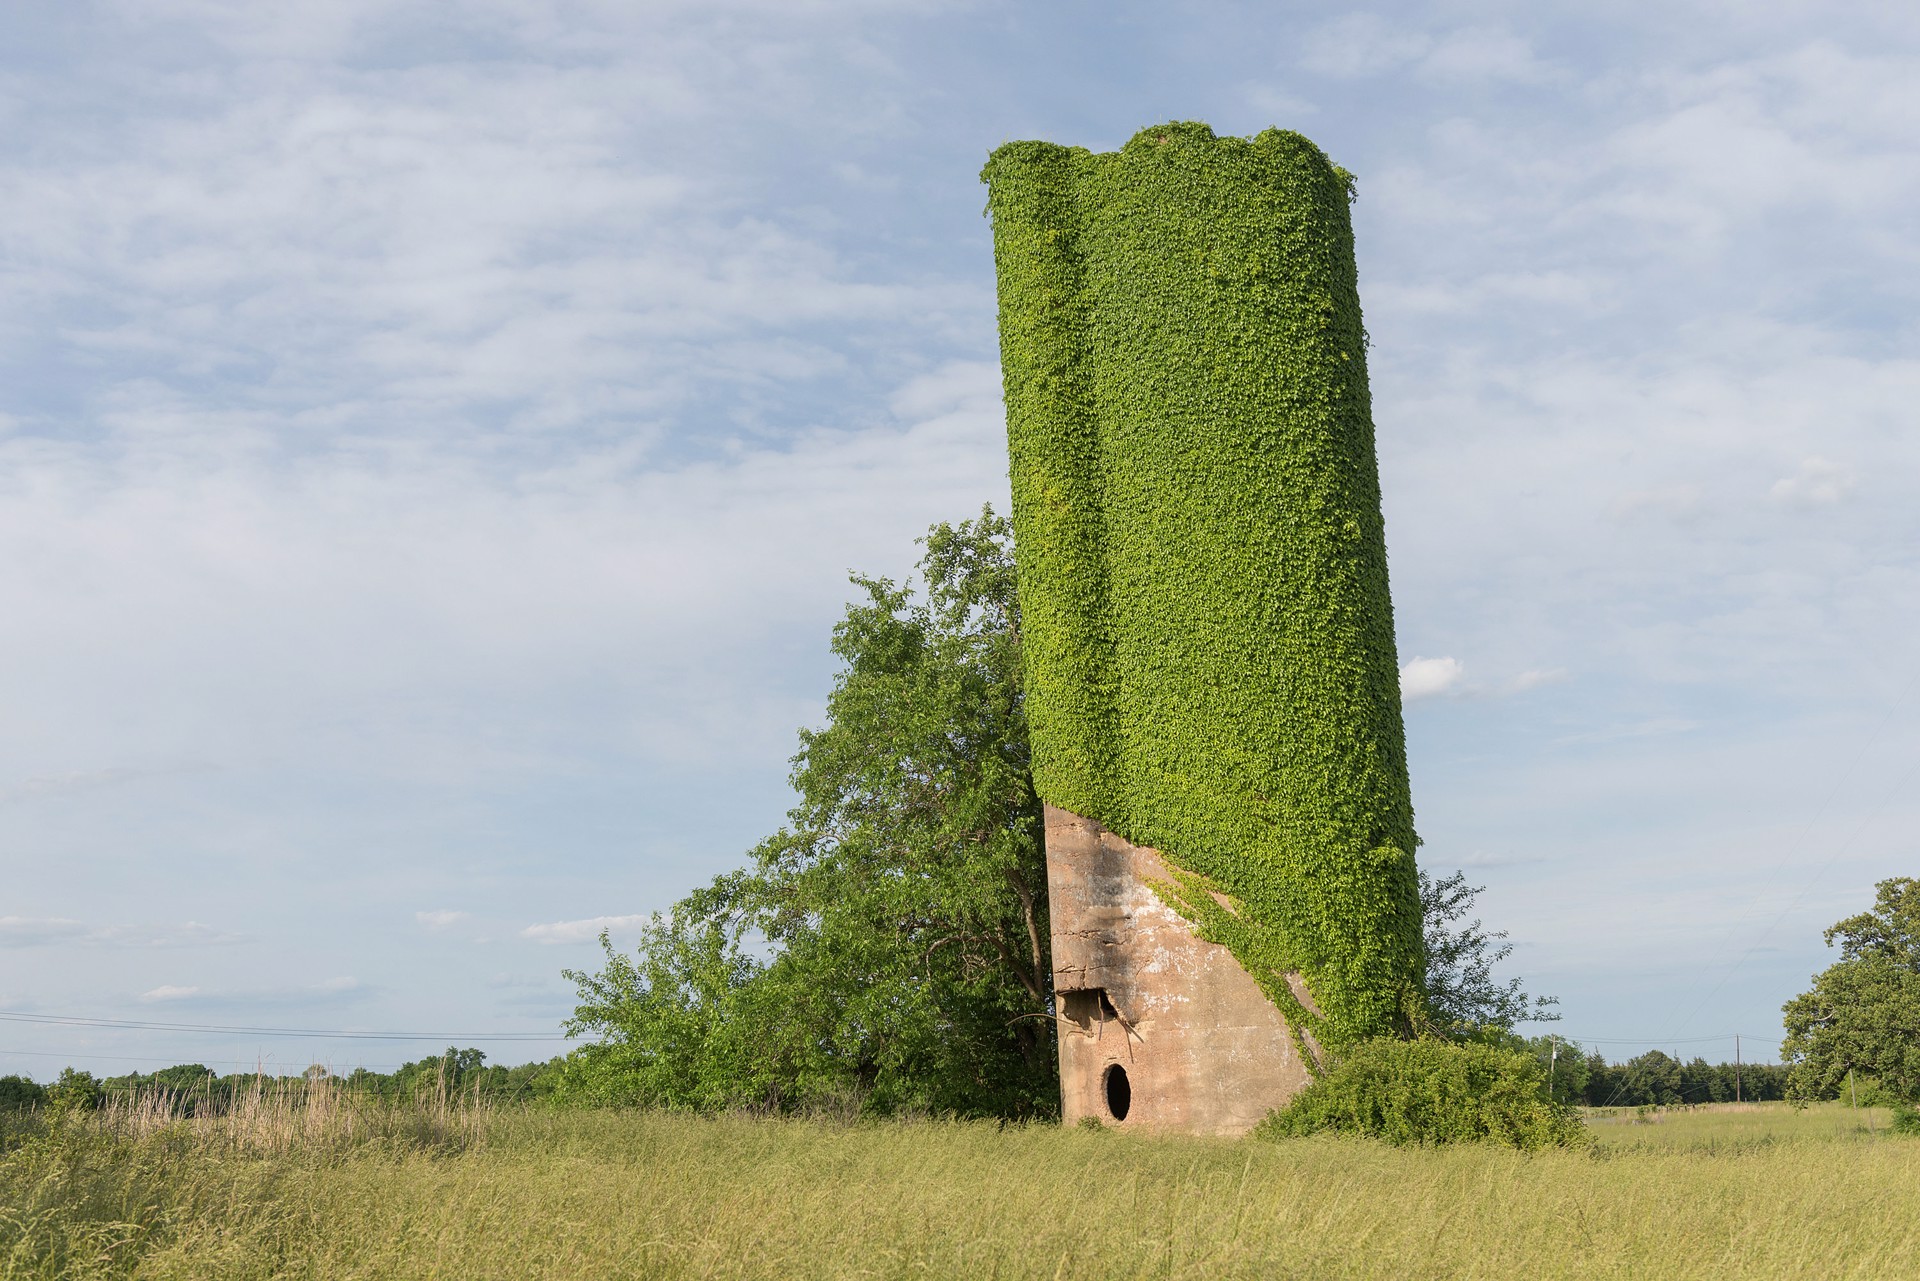 Leaning Silo, US Highway 80, Marengo County by Robin McDonald